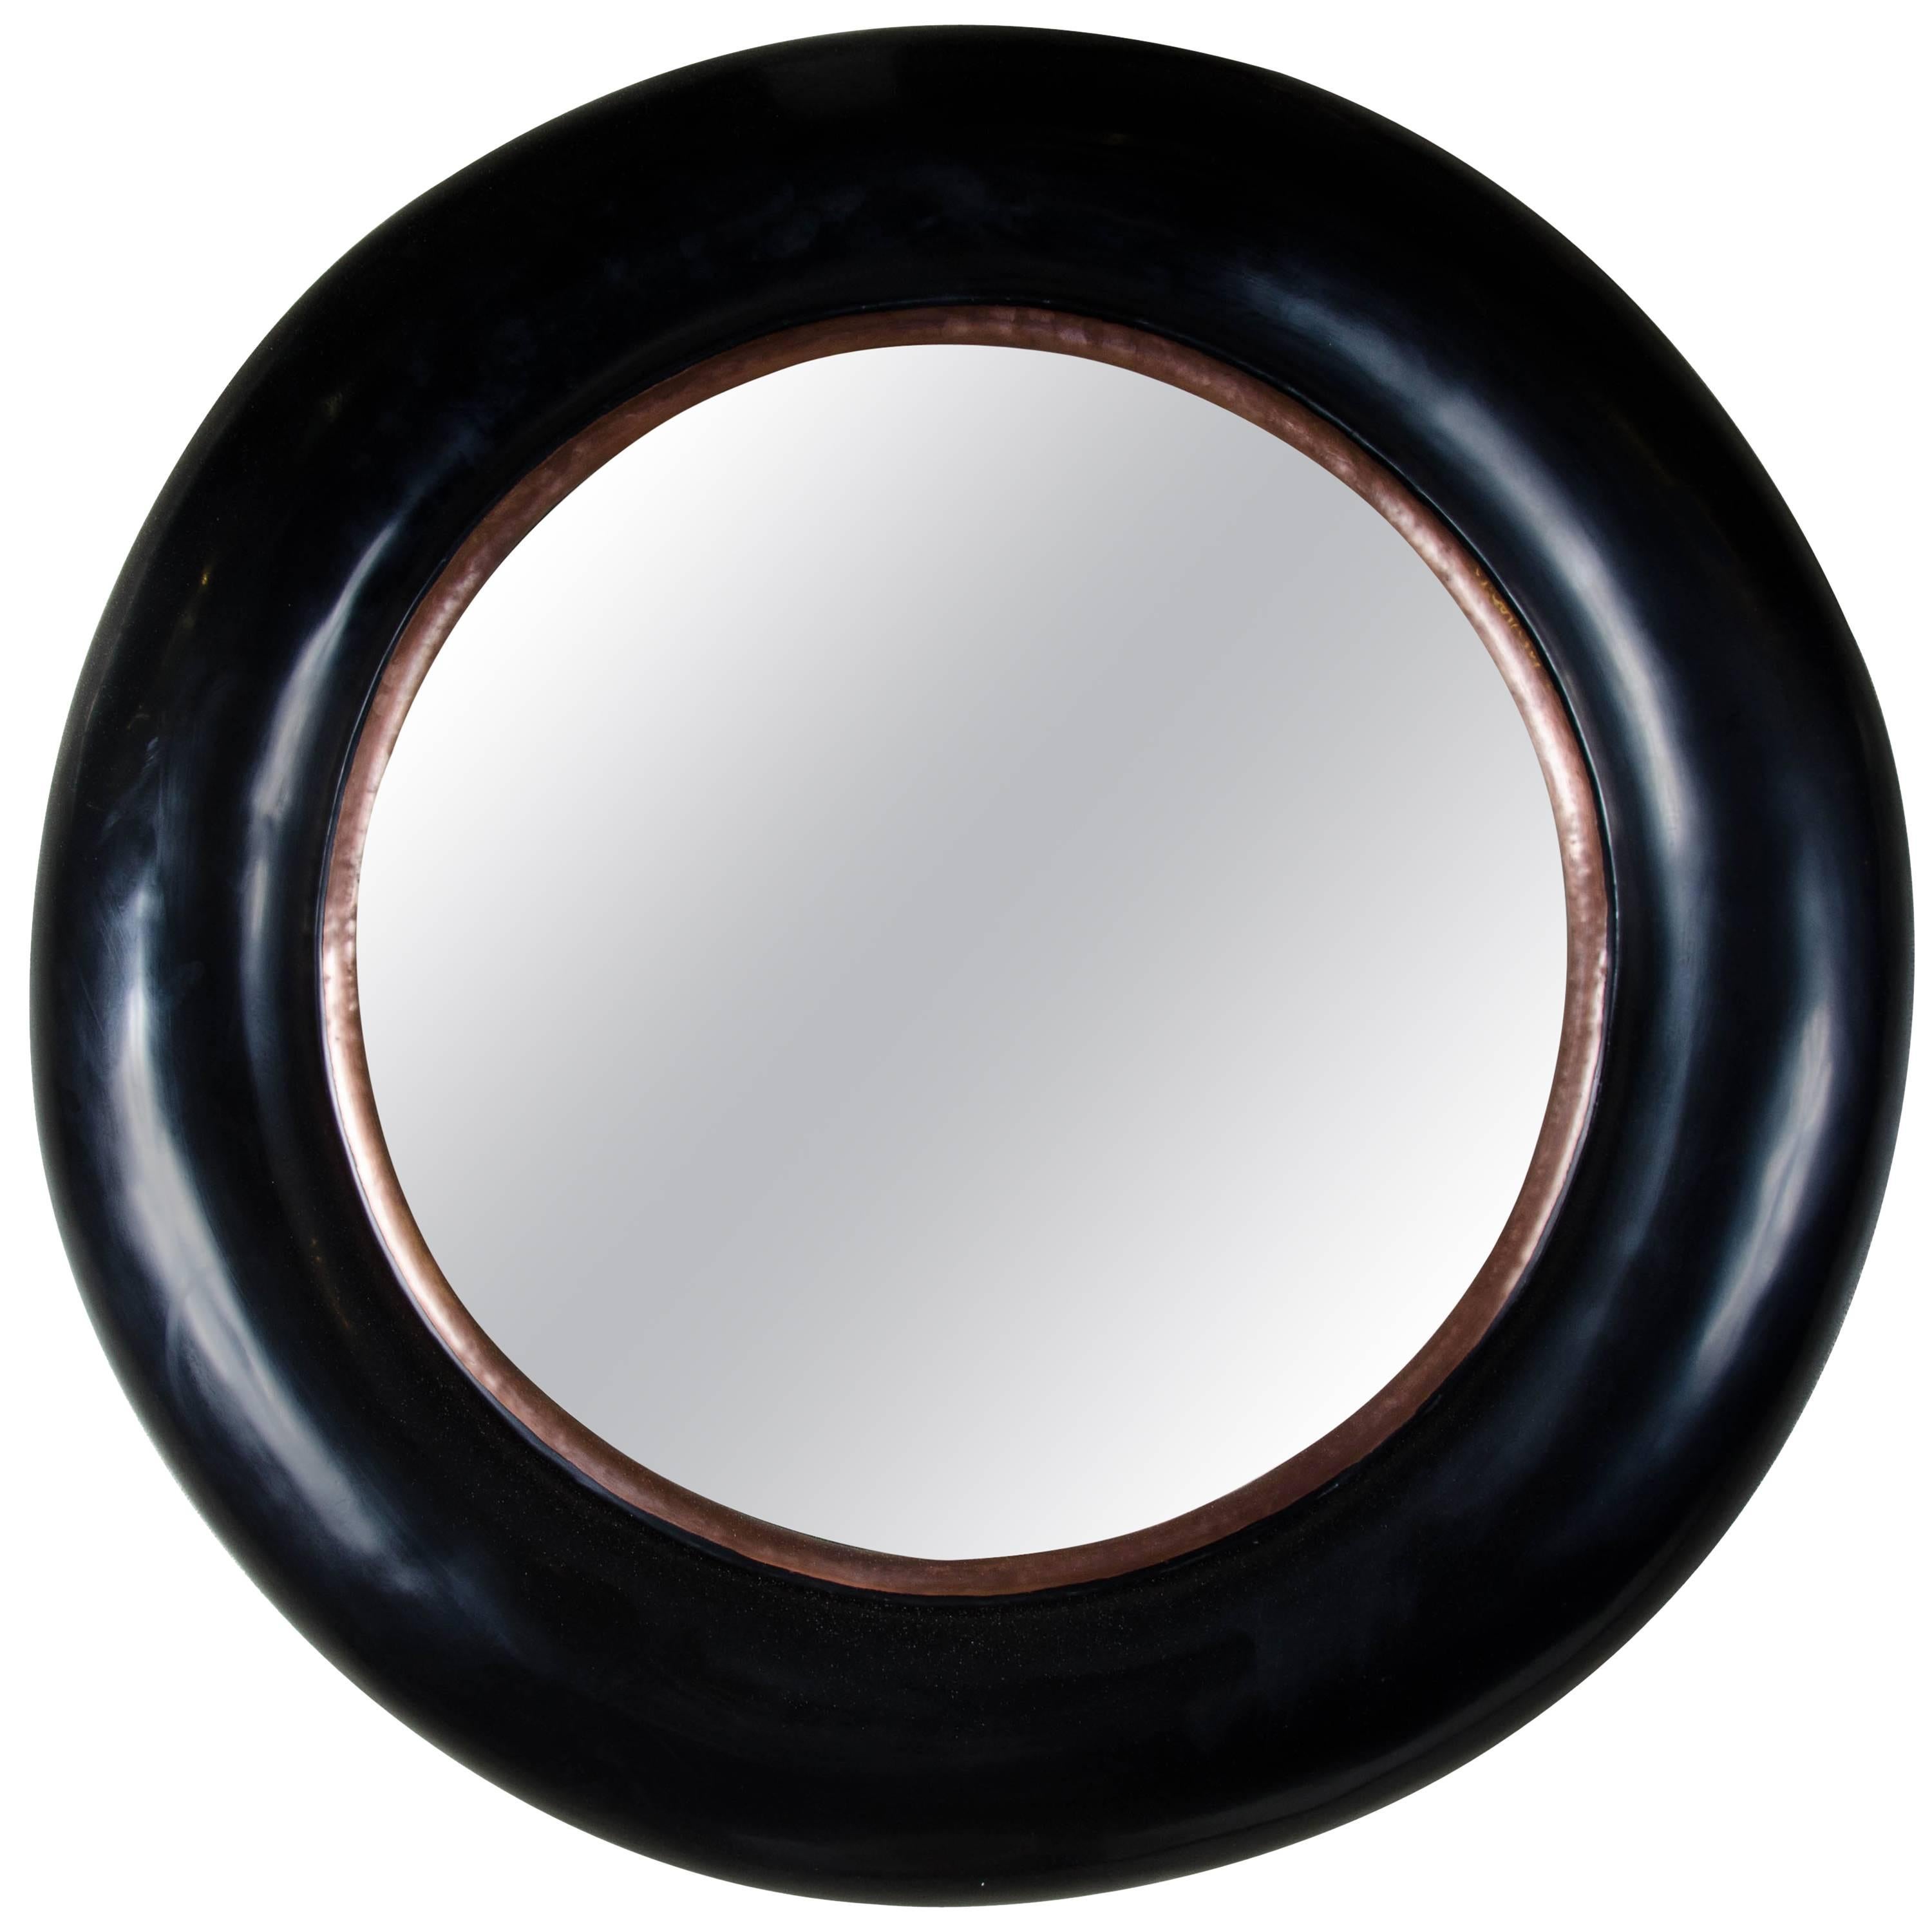 Rounded Mirror with Copper Trim by Robert Kuo, Black Lacquer, Limited Edition